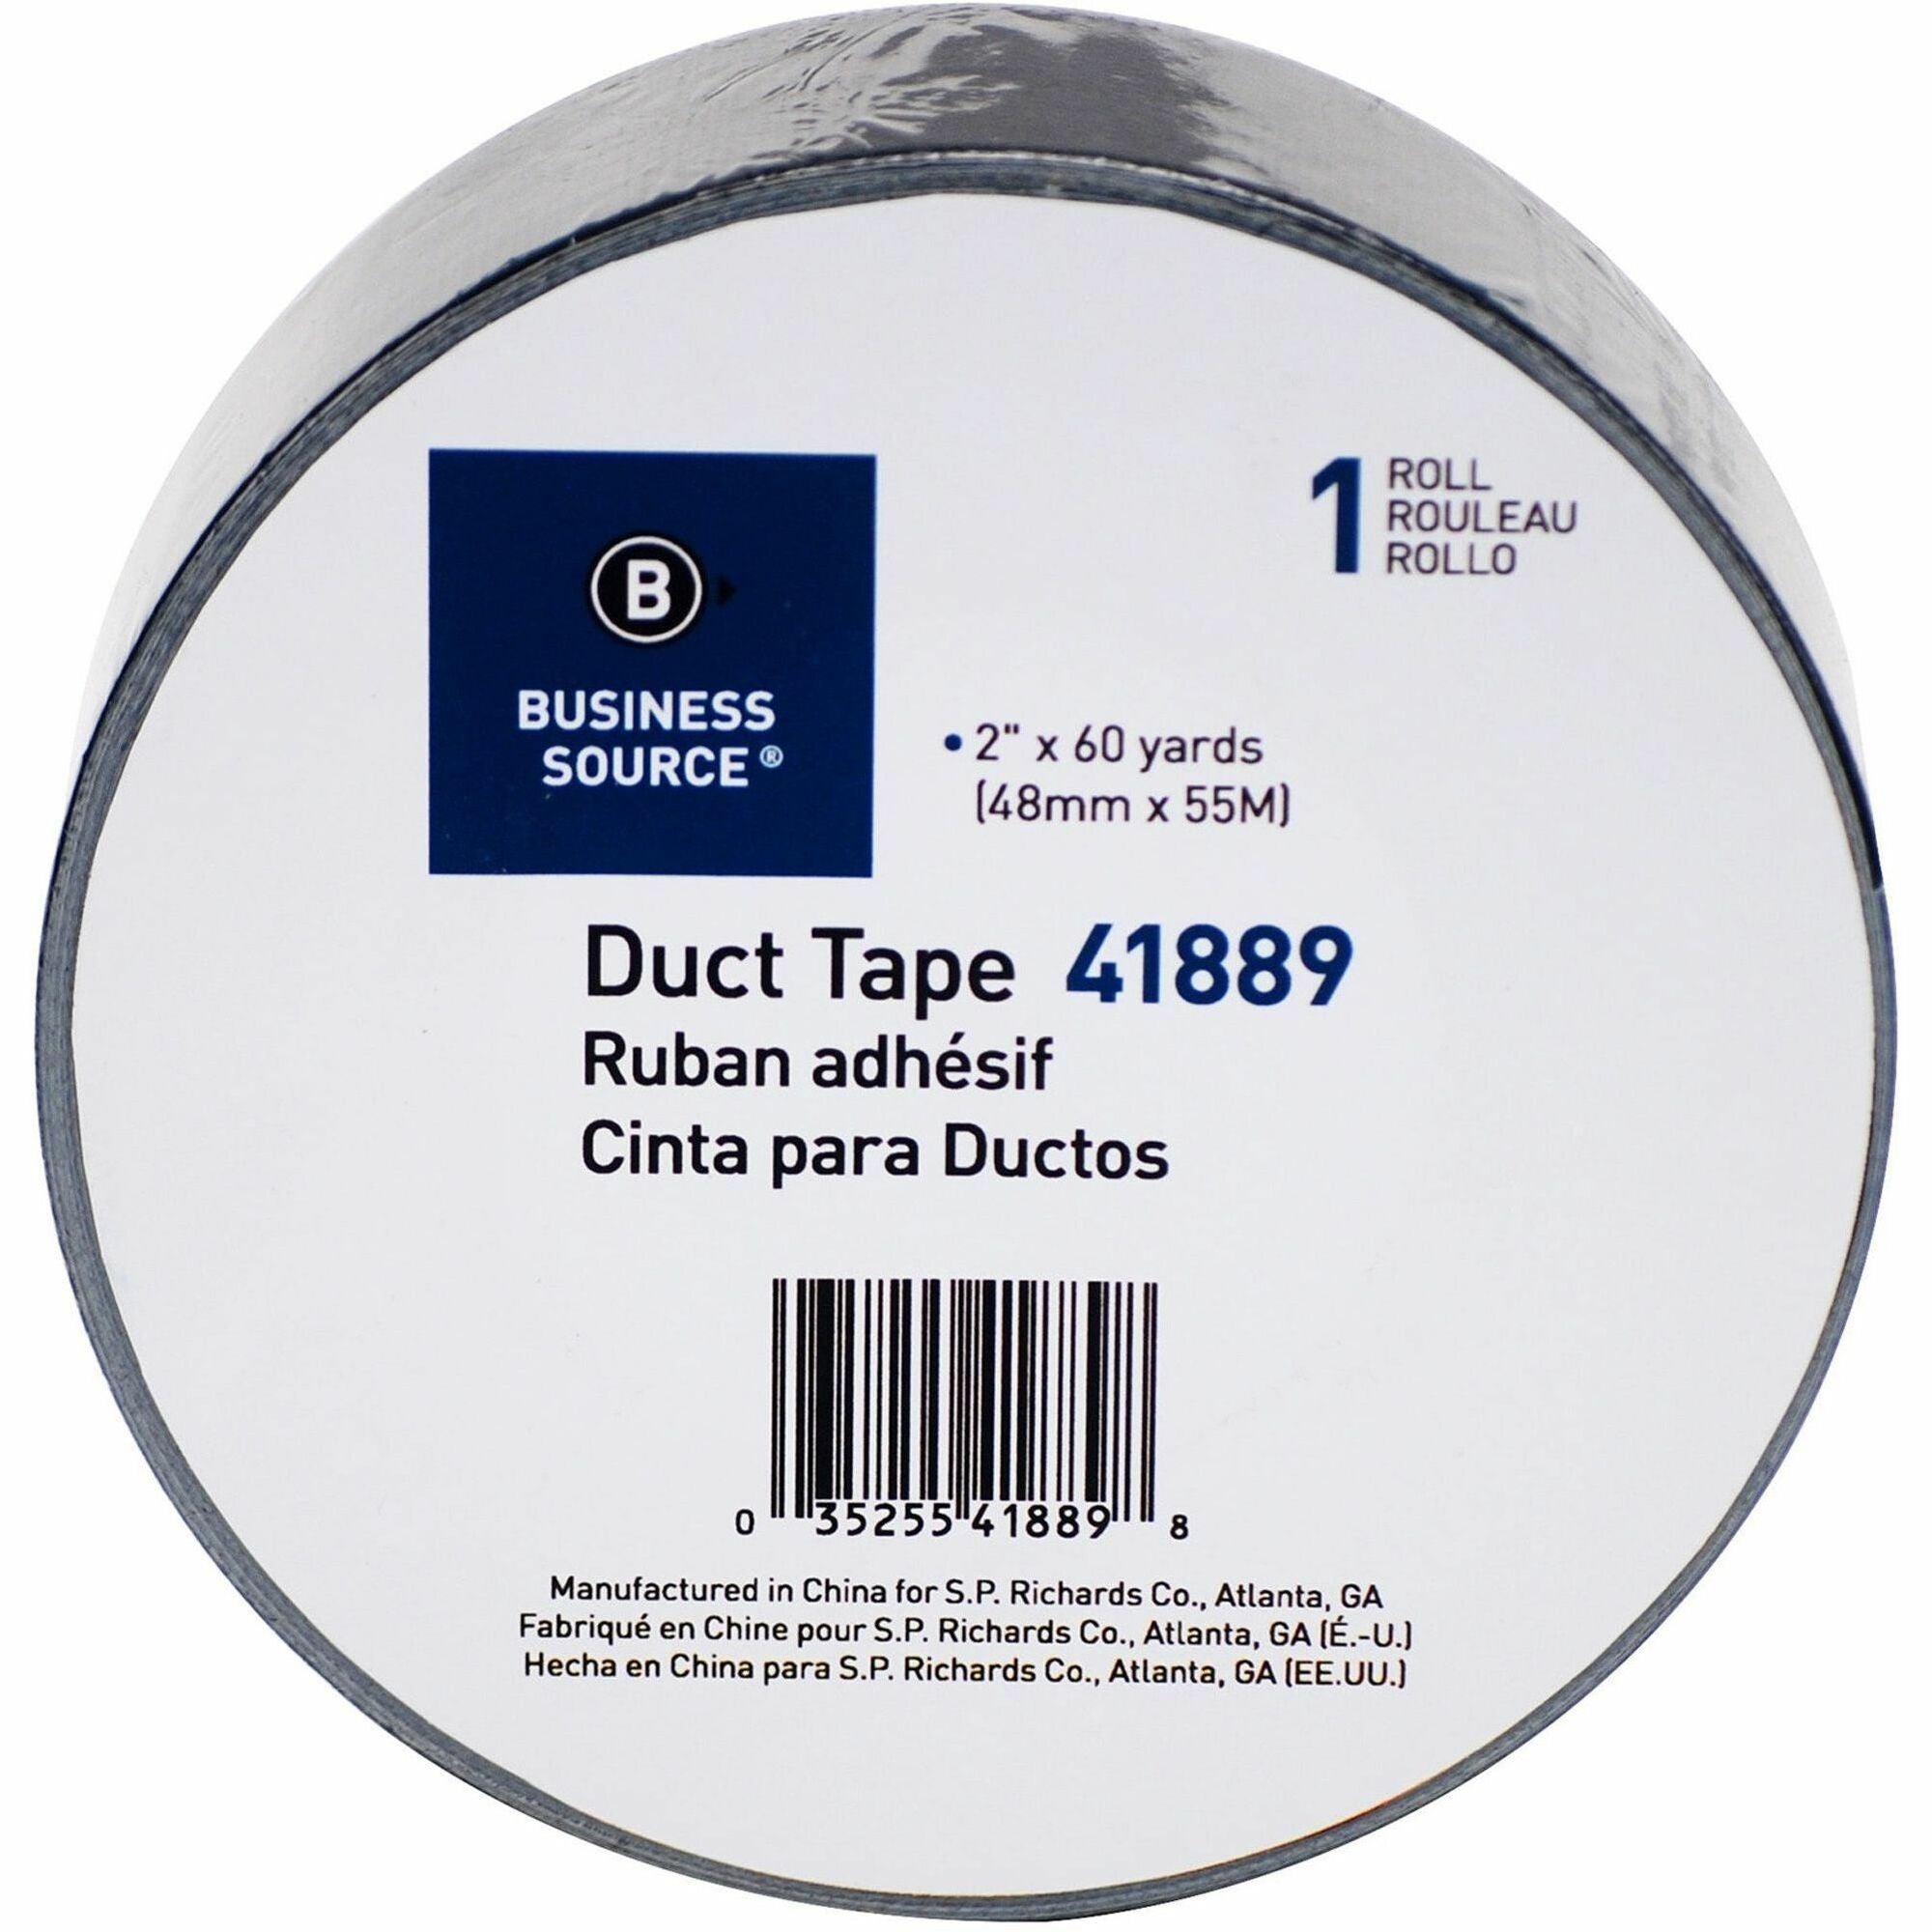 Business Source General-purpose Duct Tape - 60 yd Length x 2" Width - 9 mil Thickness - For Indoor, Outdoor, General Purpose, Wrapping, Sealing - 1 / Roll - Black